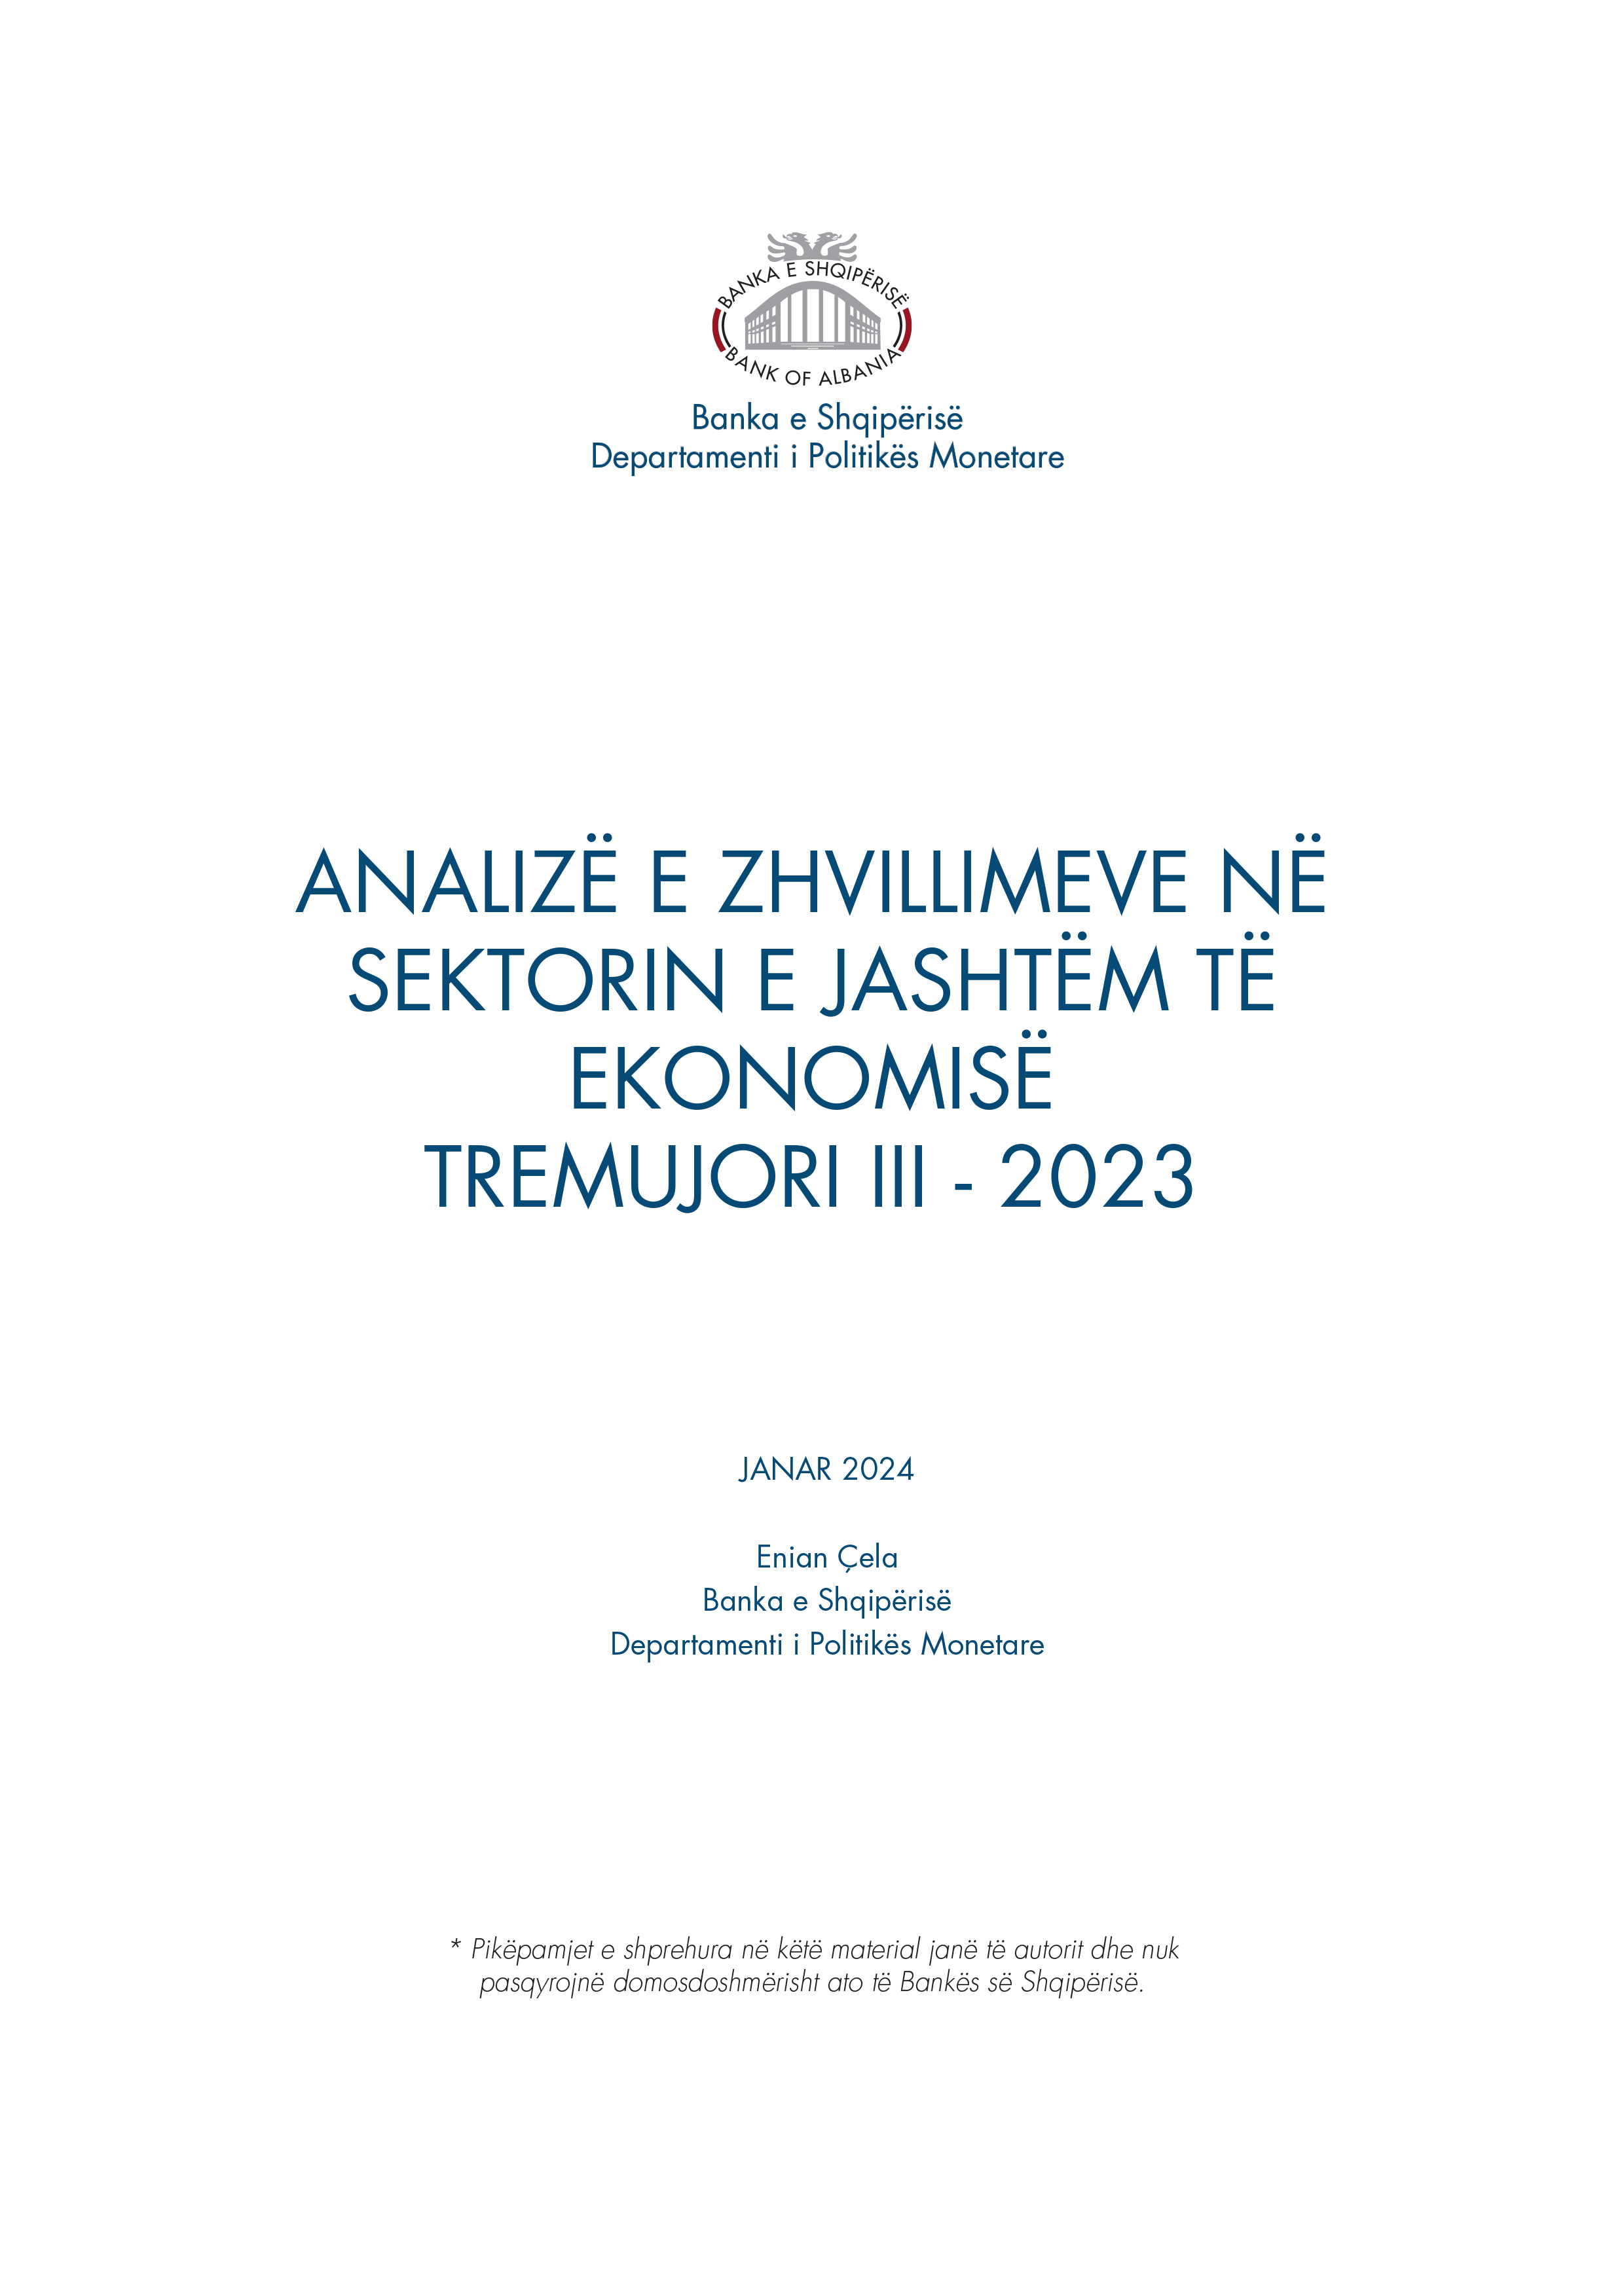 Analysis of developments in the external sector of the economy 2023 Q3